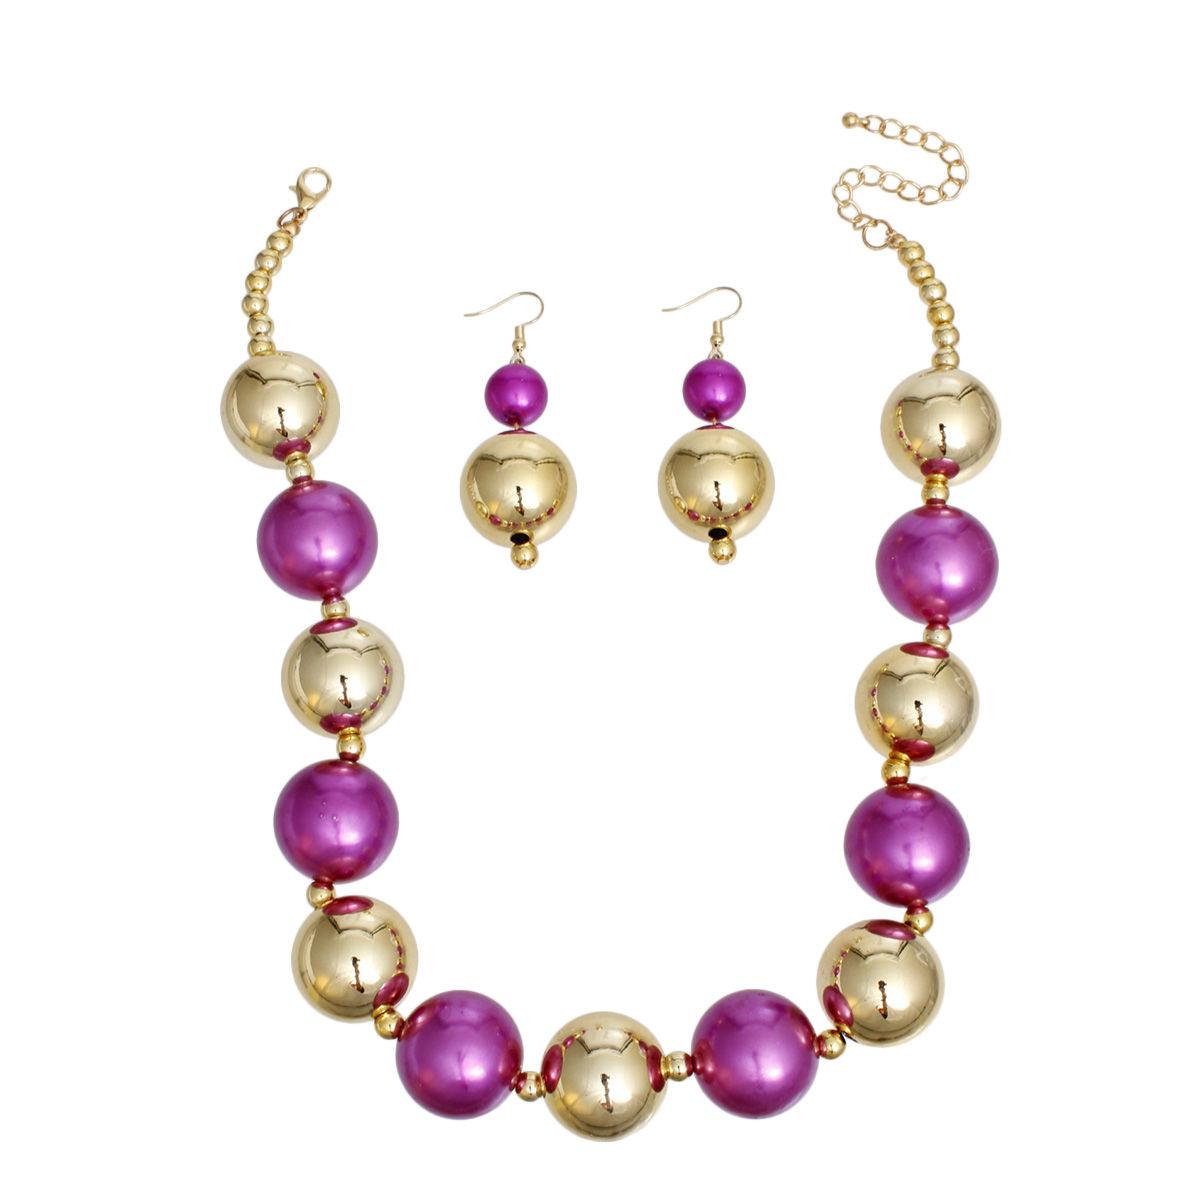 Bauble Pearl Fuchsia Gold Necklace Earrings Set - Level Up Your Fashion Jewelry Collection